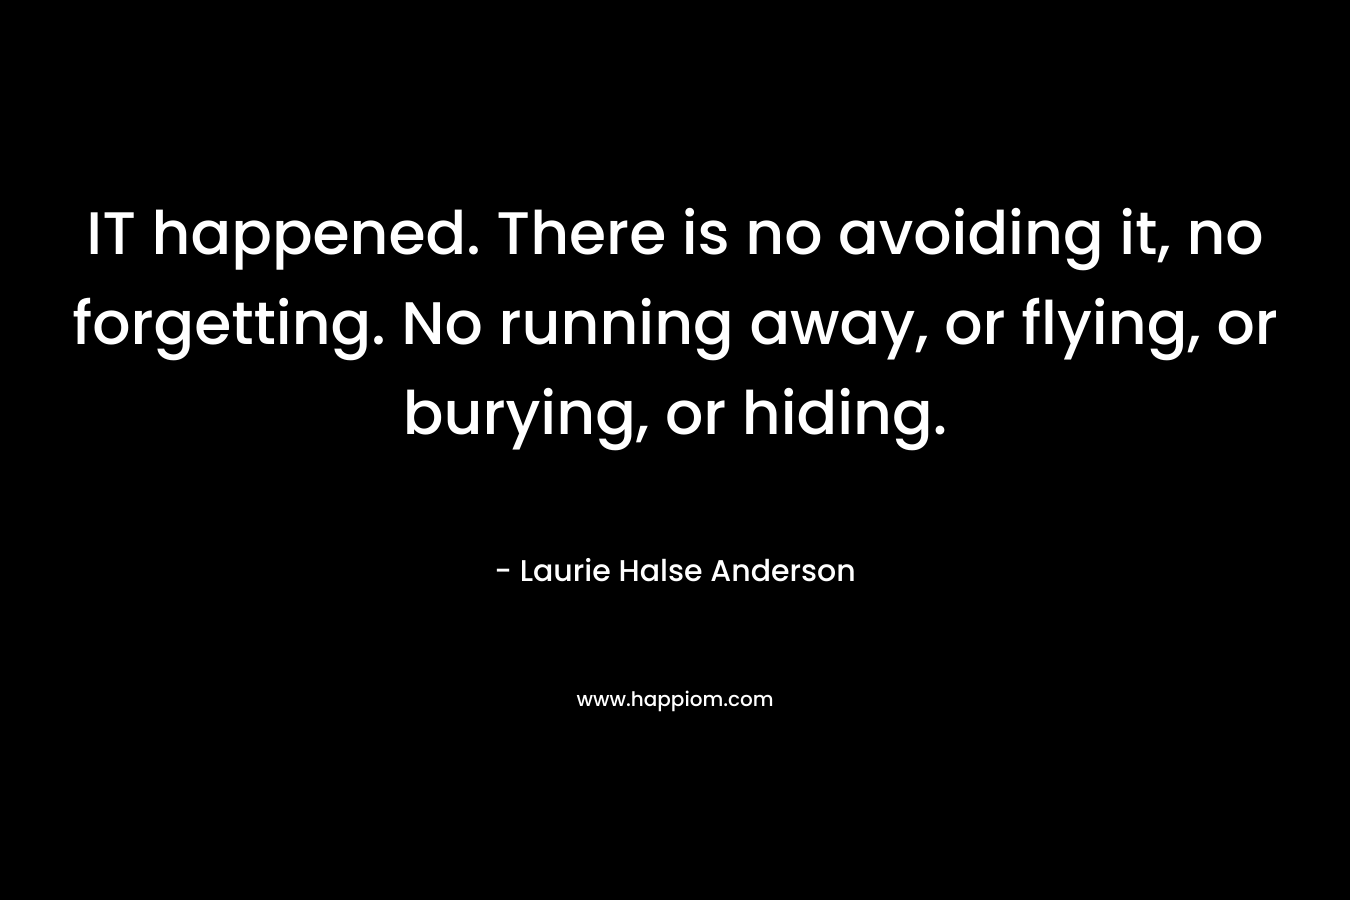 IT happened. There is no avoiding it, no forgetting. No running away, or flying, or burying, or hiding. – Laurie Halse Anderson